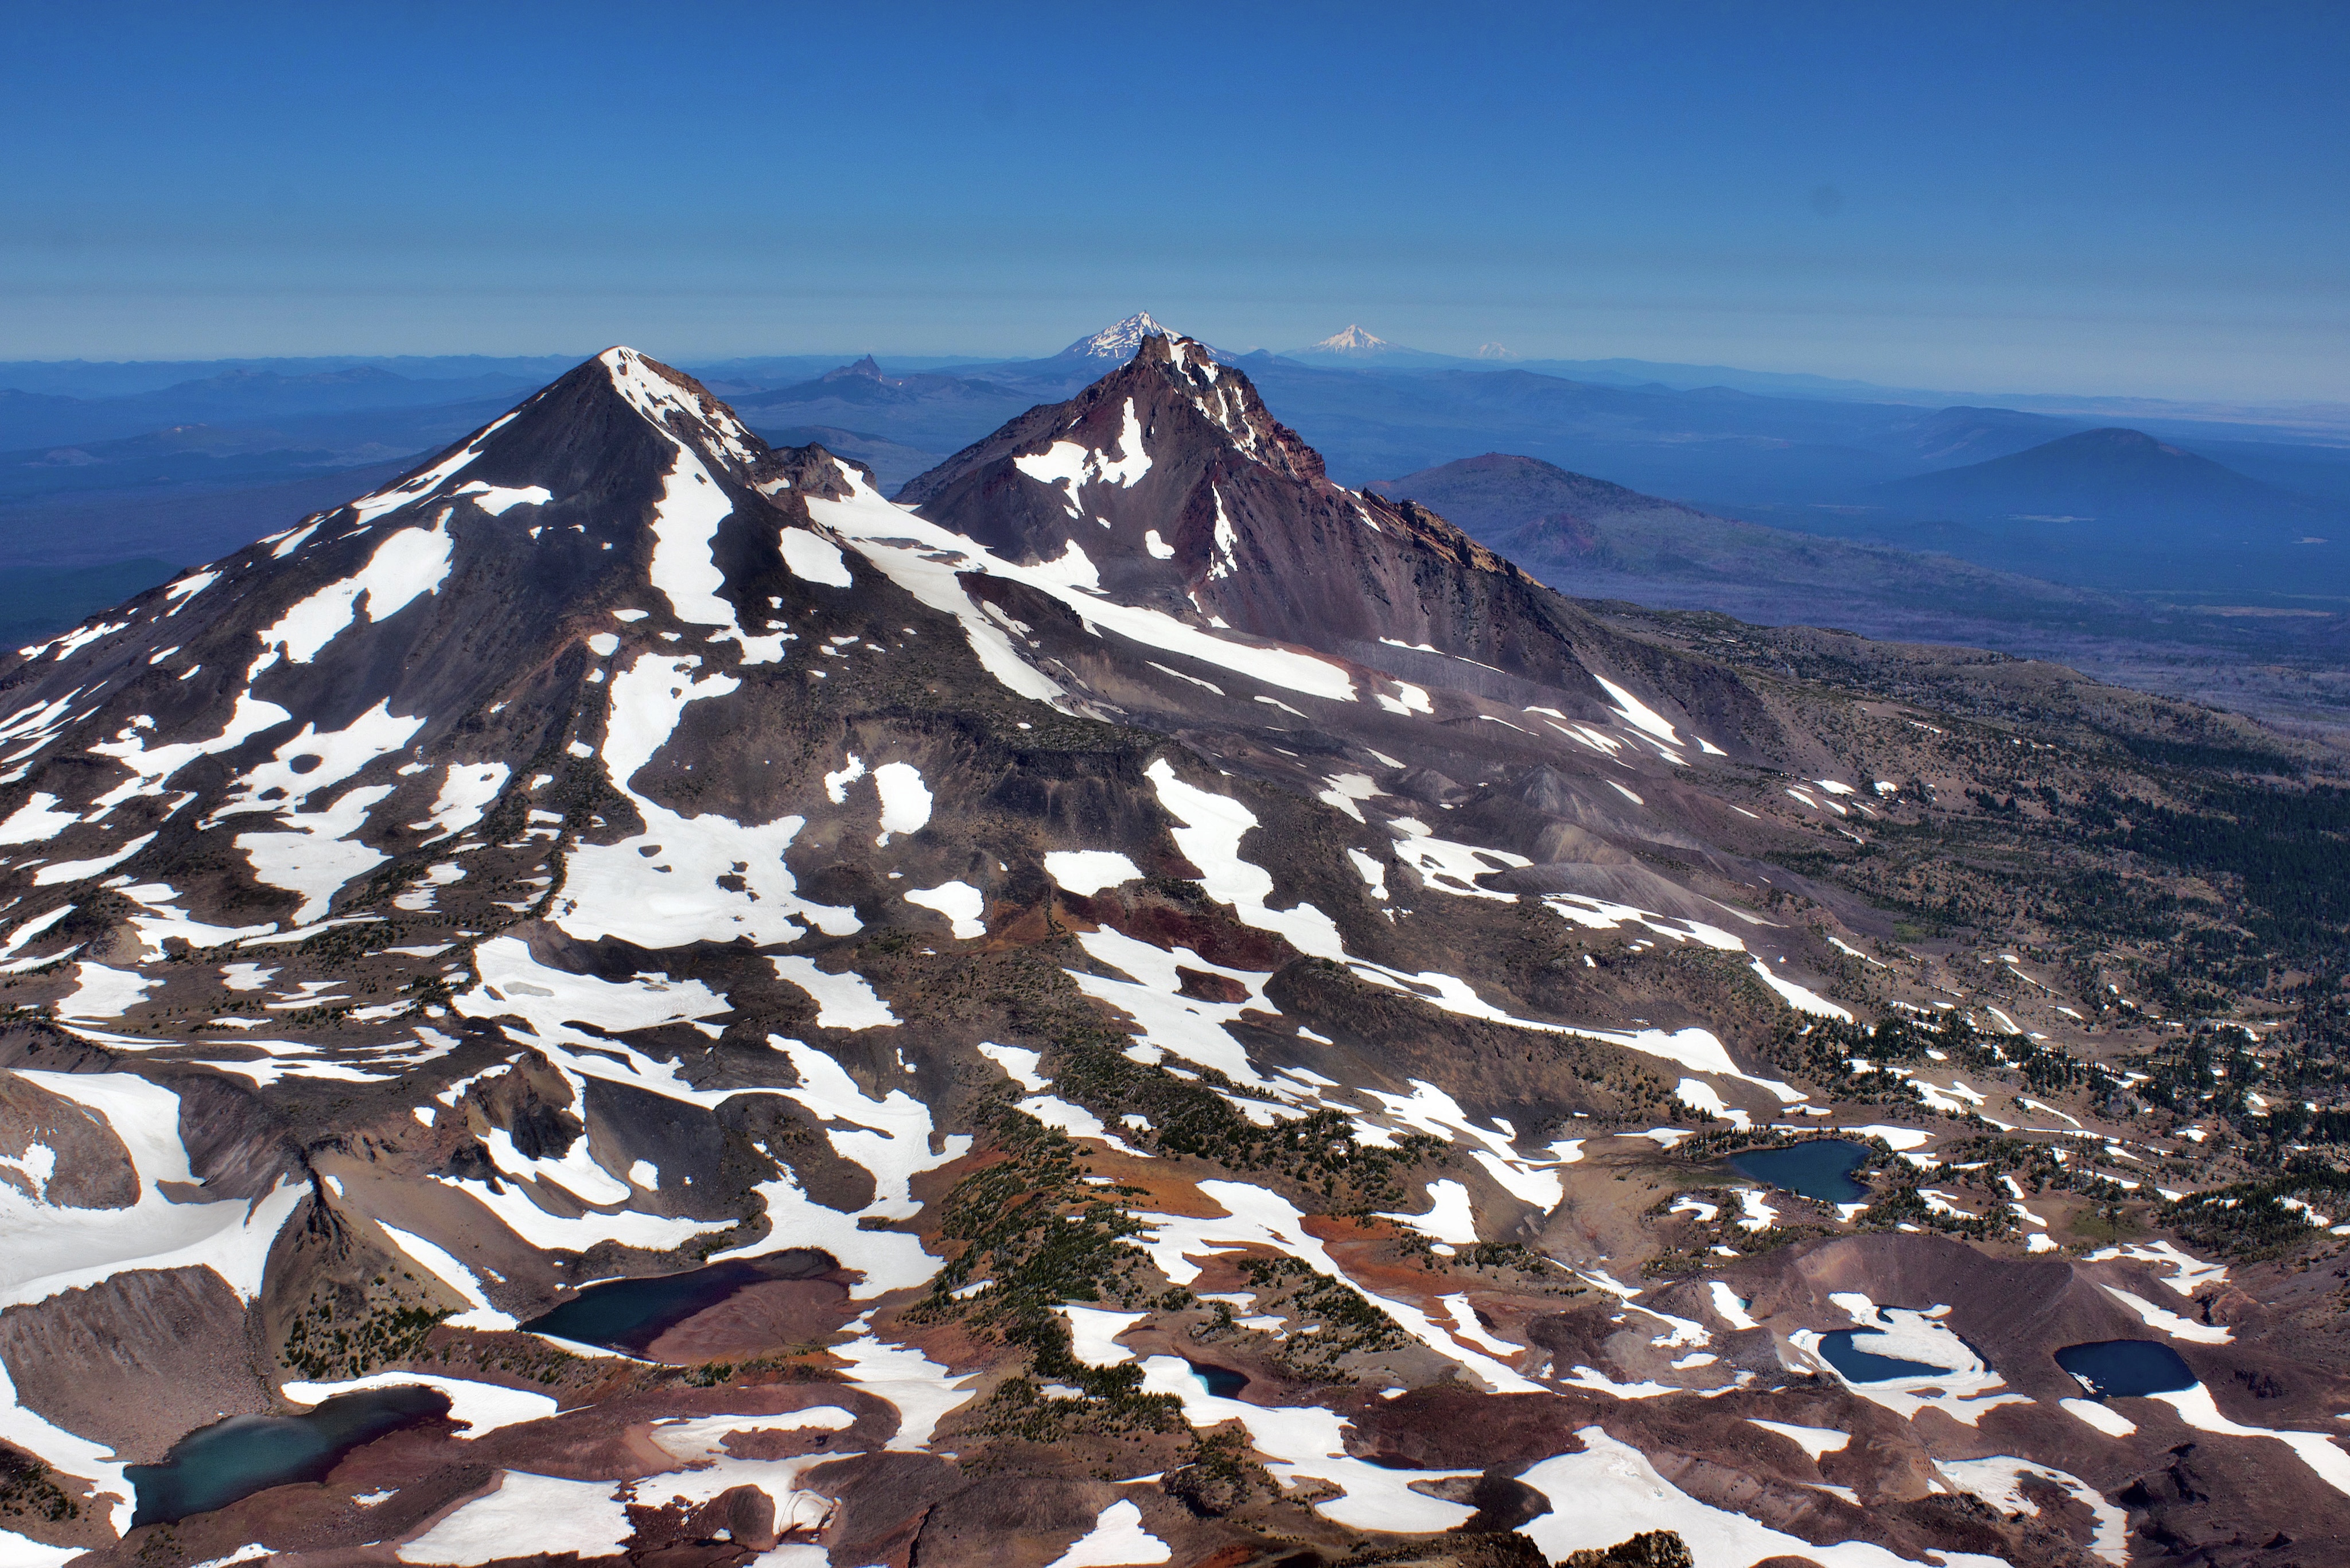 Views from the top of South Sister on the drive from Bend to Crater Lake